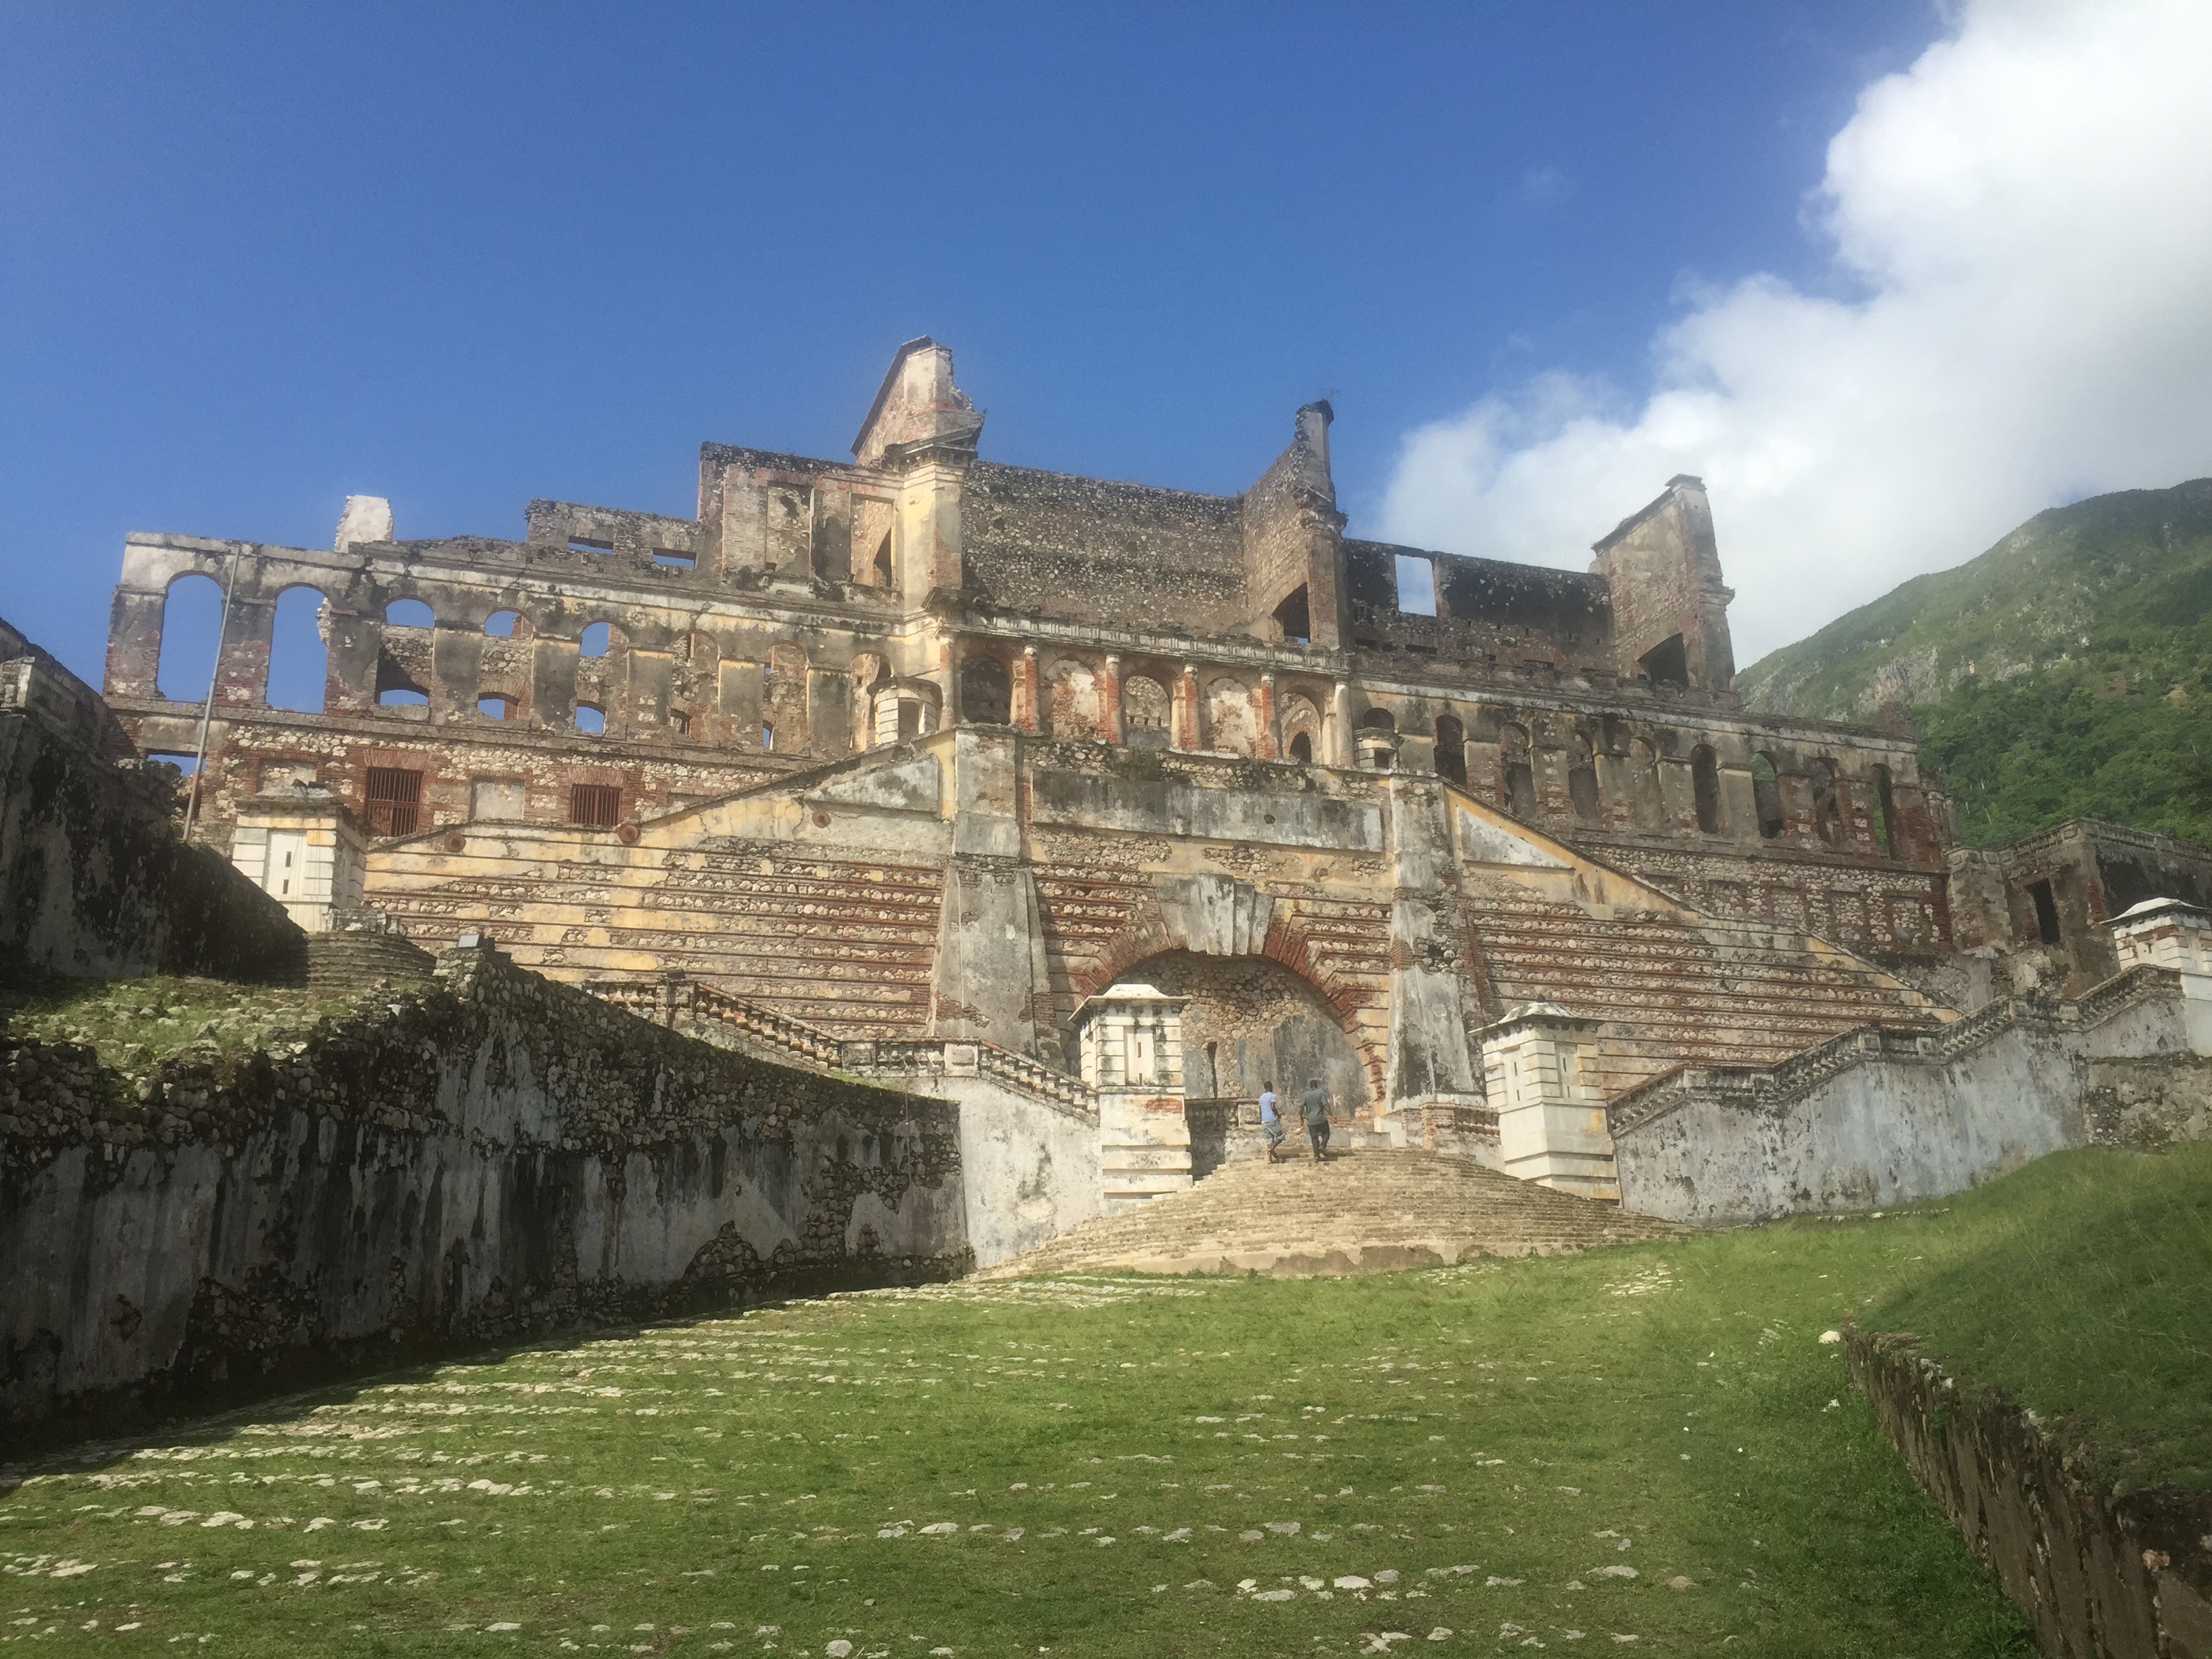 Visiting some amazing ruins in northern Haiti
The Sans-Souci Palace was once the home of Henri Christophe and 2,500 of his closest friends, family, and crew.